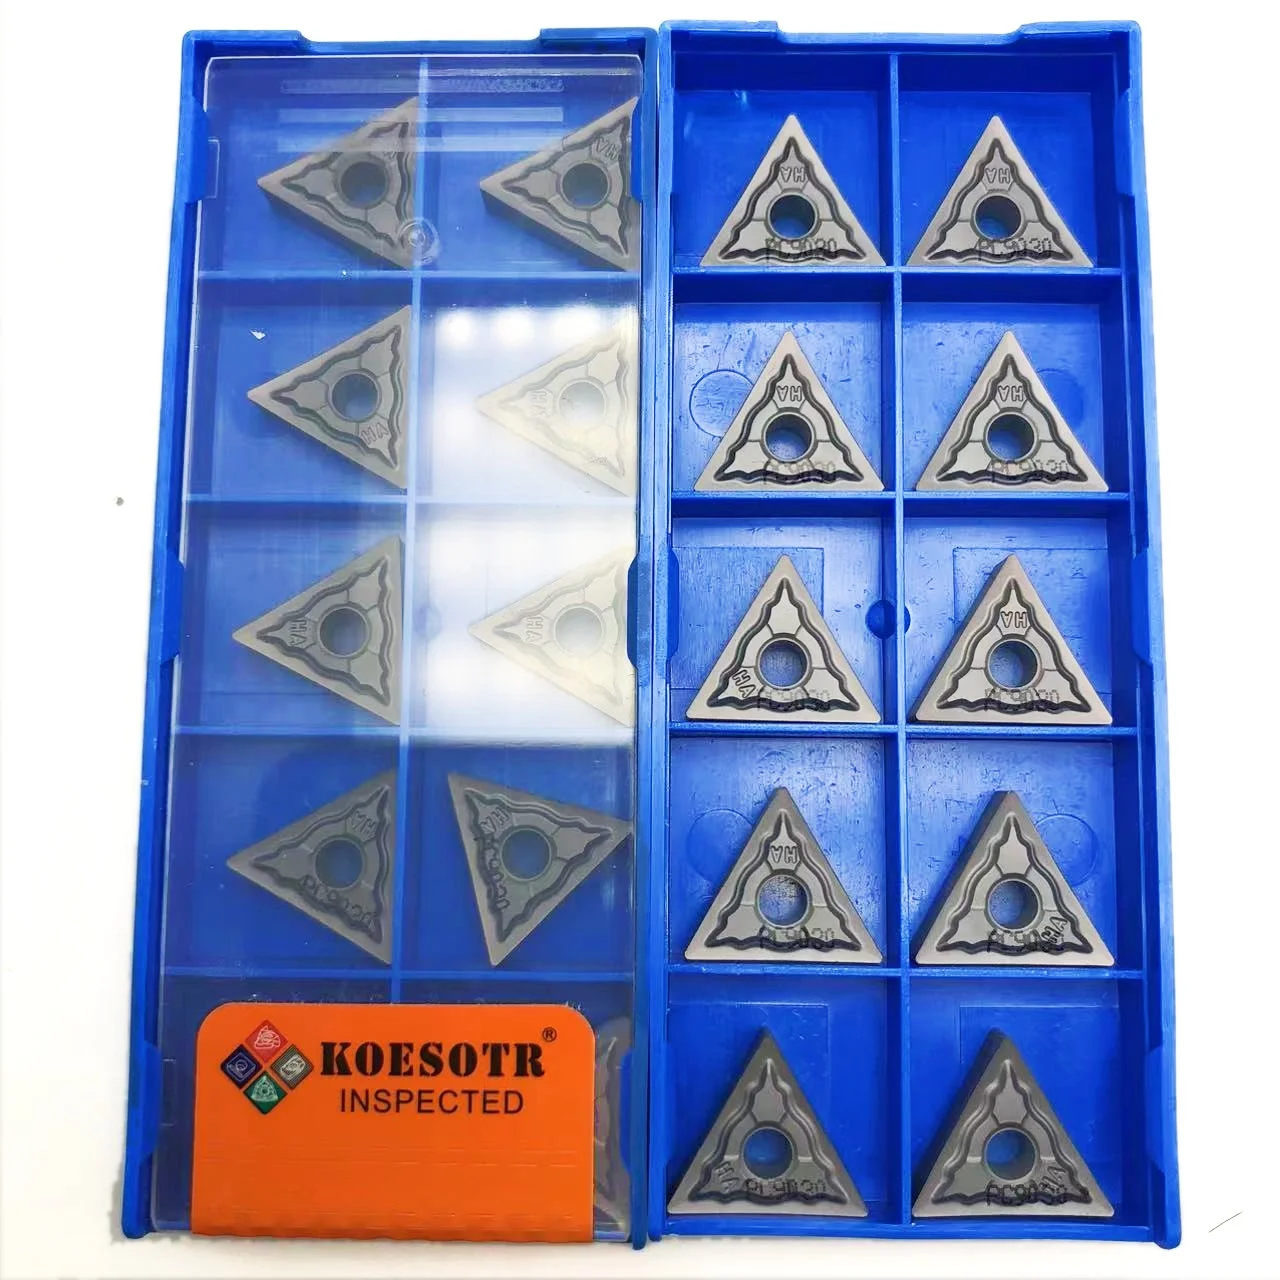 TNMG160408 TNMG160404 HA PC9030 triangle indexable carbide inserts high quality metal turning tools lathe tools turning tools images - 6